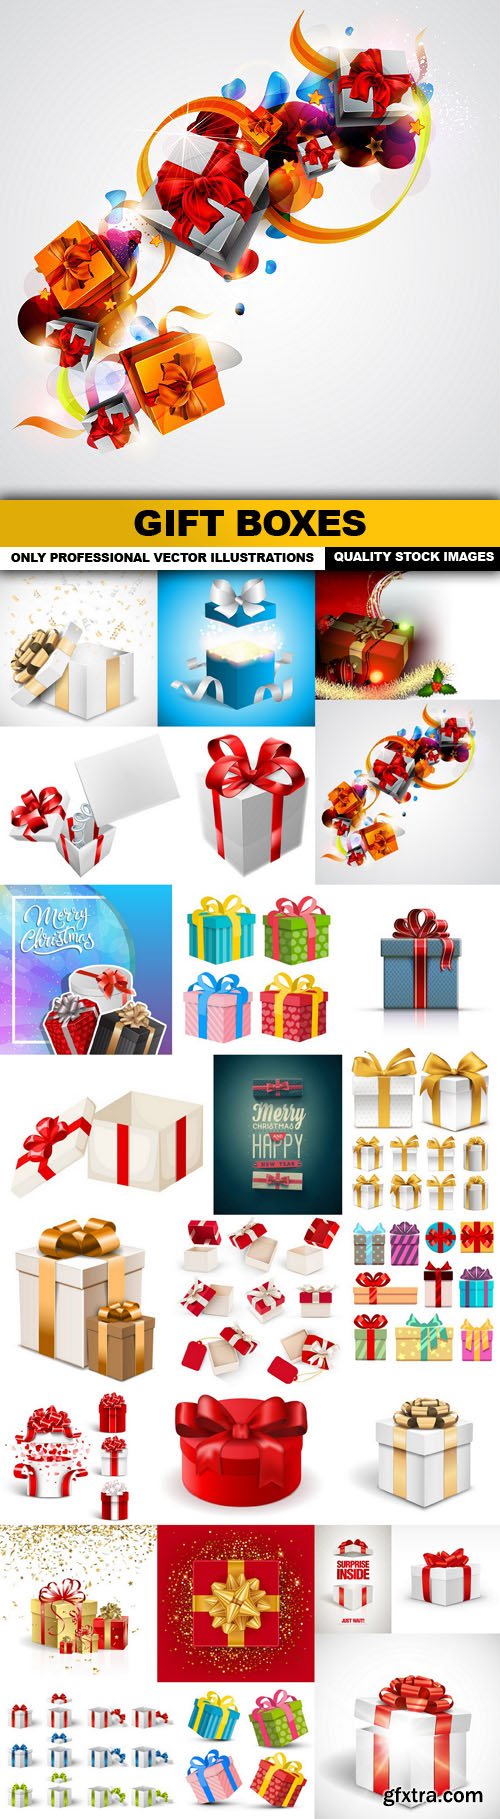 Gift Boxes - 25 Vector